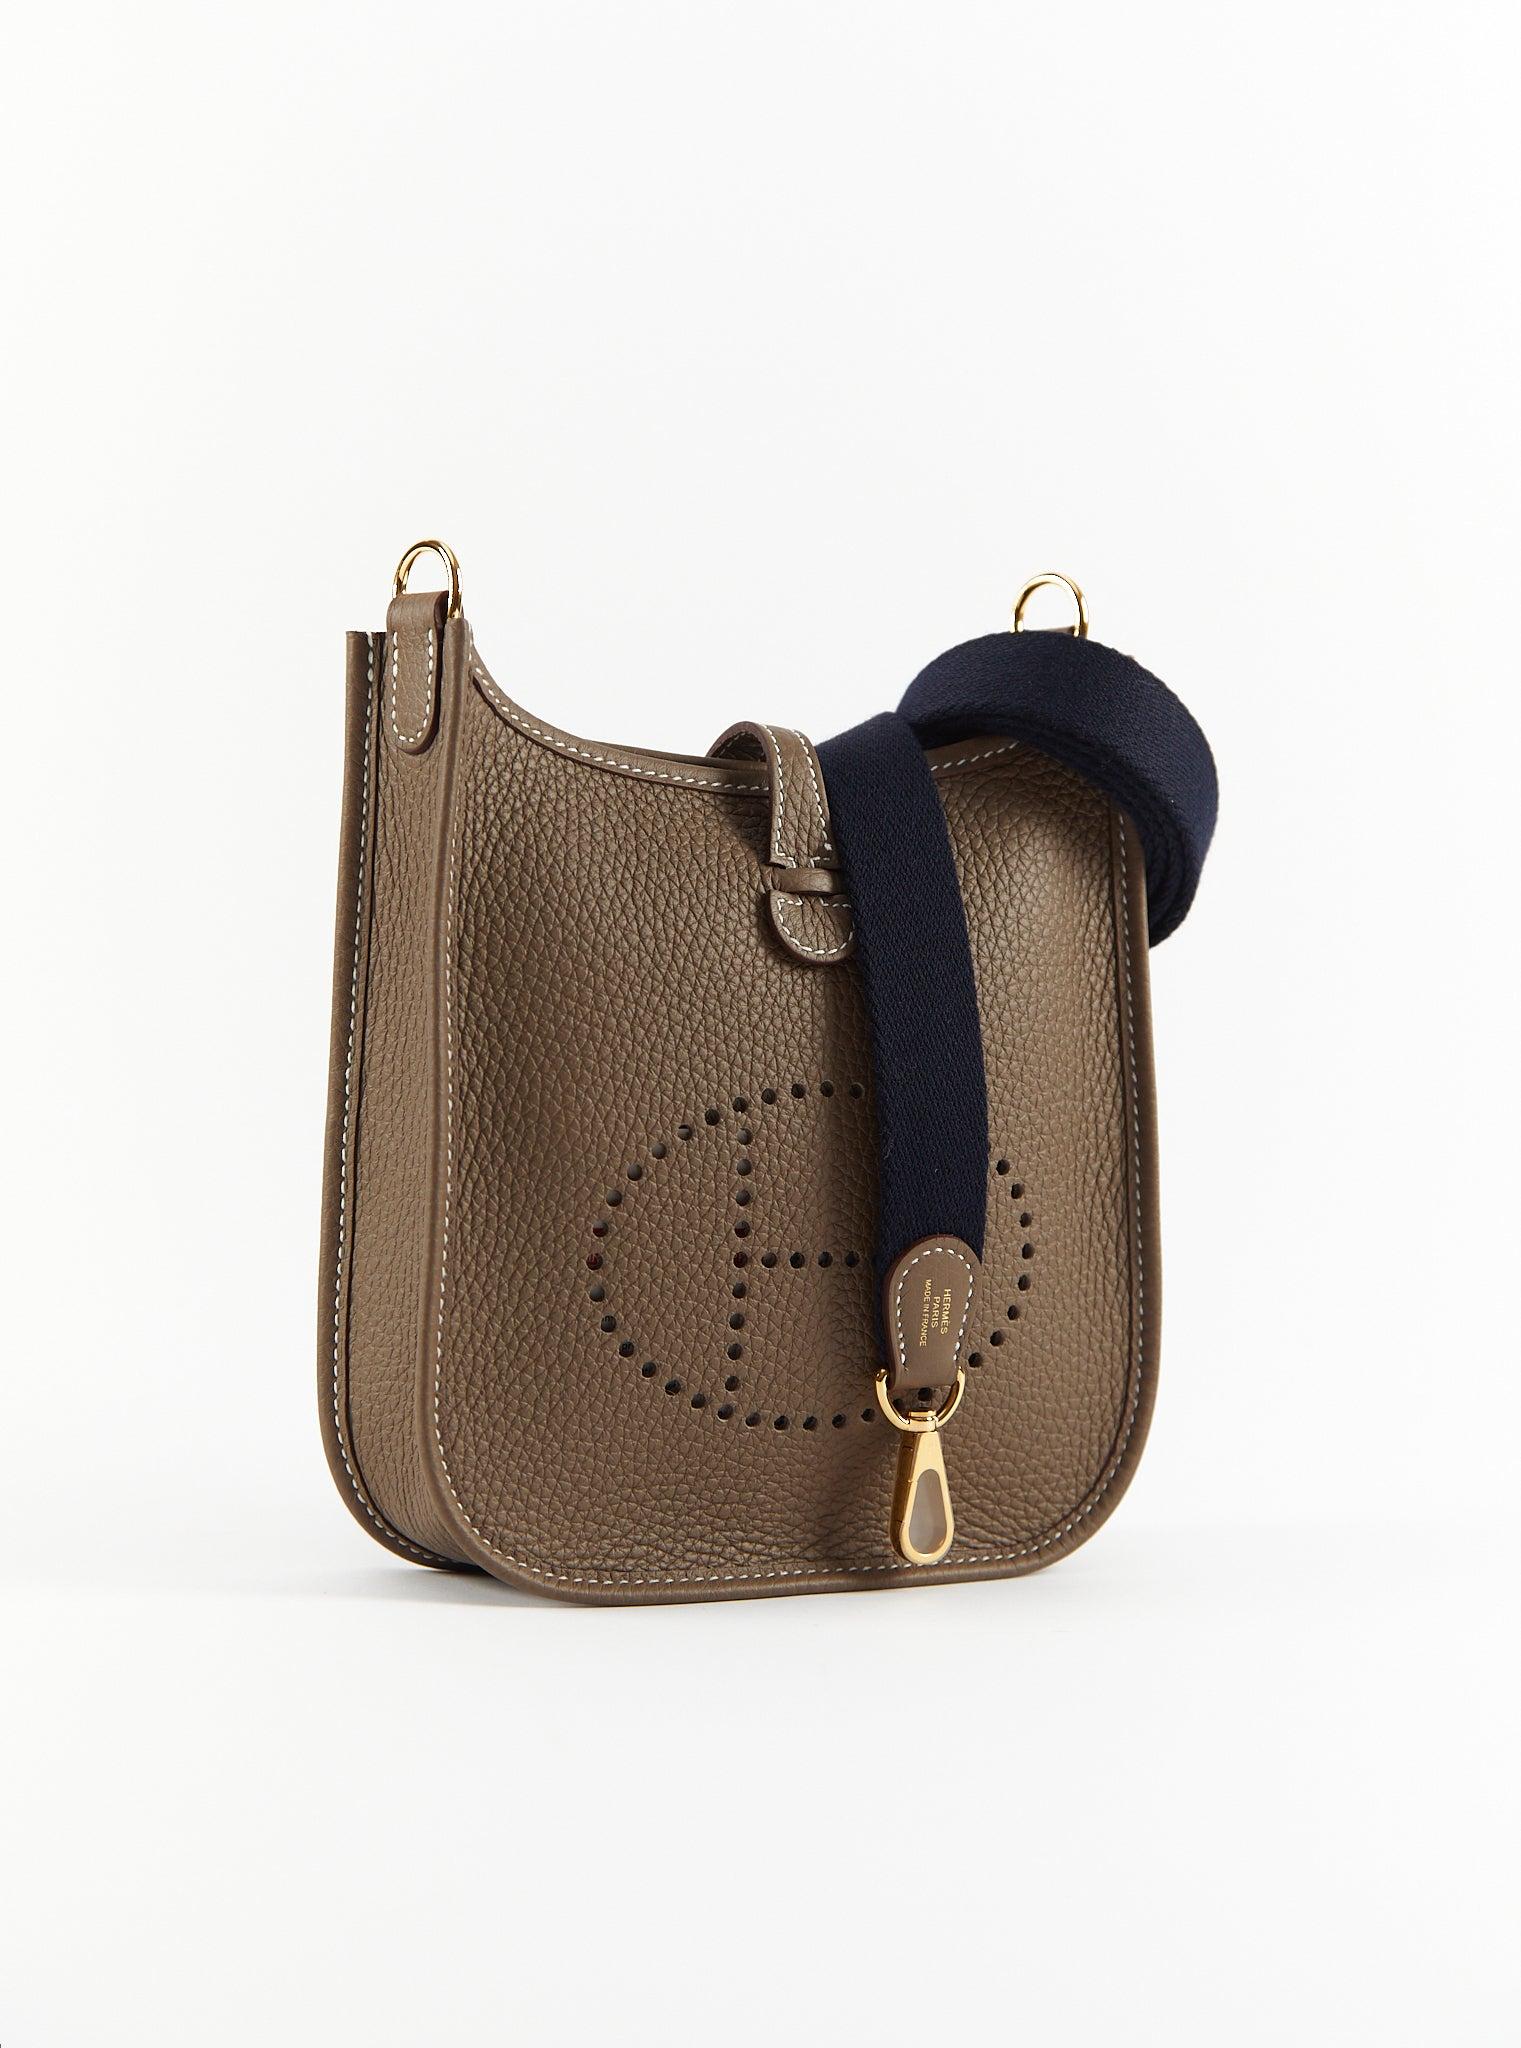 Hermès Mini Evelyn TPM in Etoupe with Blue Encre Strap

Clemence Leather with Gold Hardware

Canvas Shoulder/Crossbody strap

B Stamp / 2023

Accompanied by: Original receipt, Hermes box, Hermes dustbag, shoulder strap, shoulder strap dustbag and